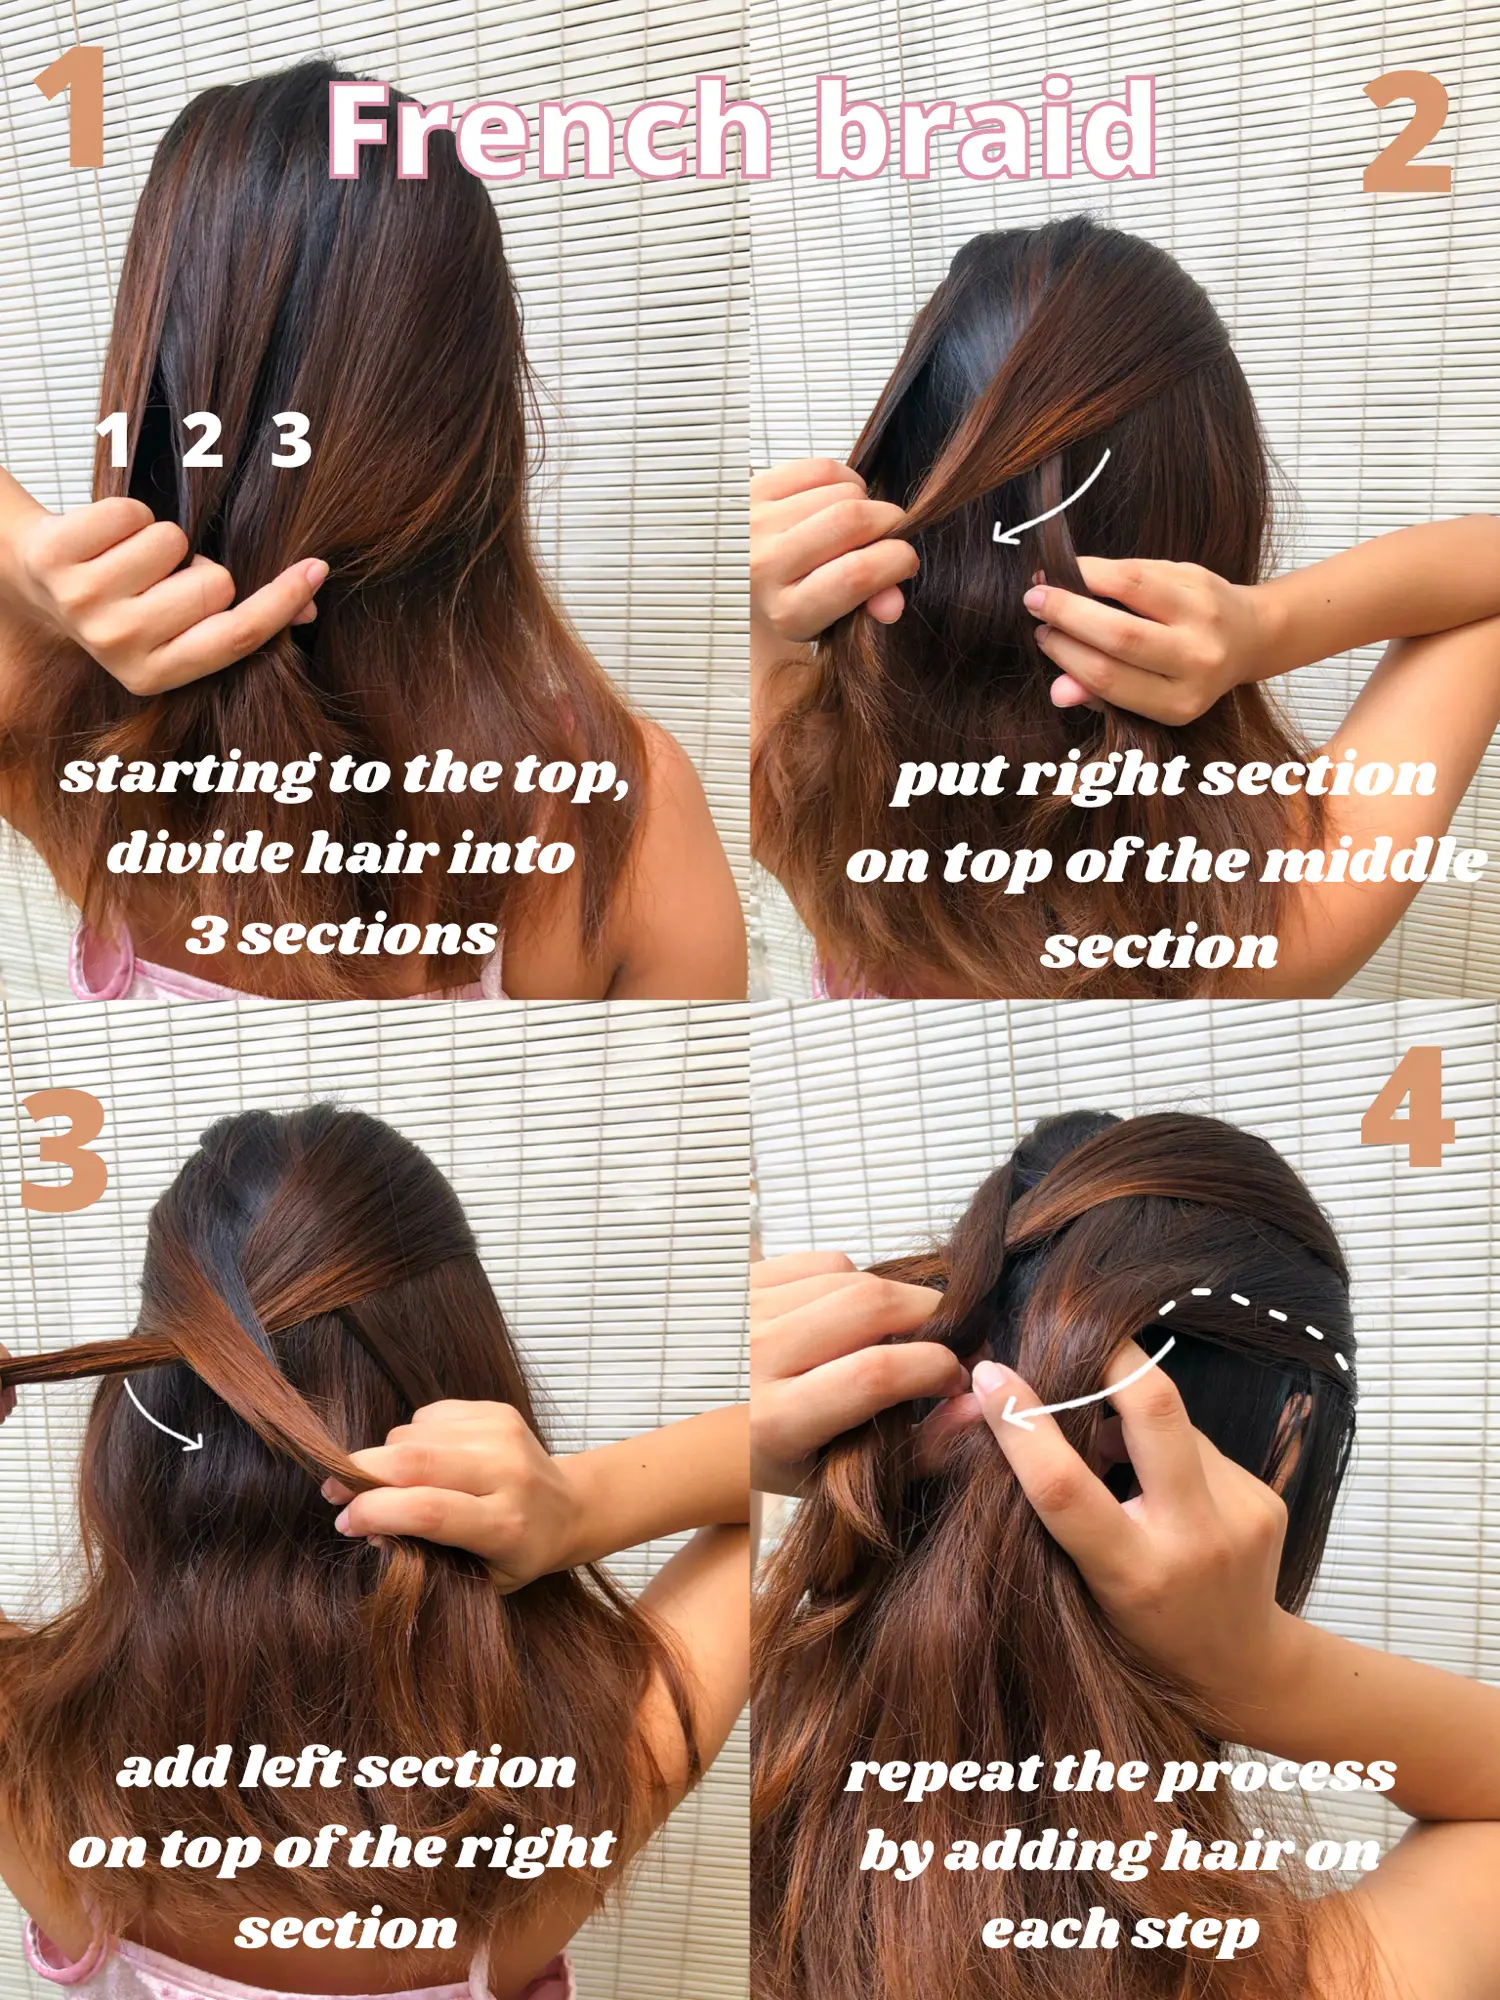 Difference between Dutch & French braid👩‍🦰🎀 | Gallery posted by Aleeh De  Vera | Lemon8